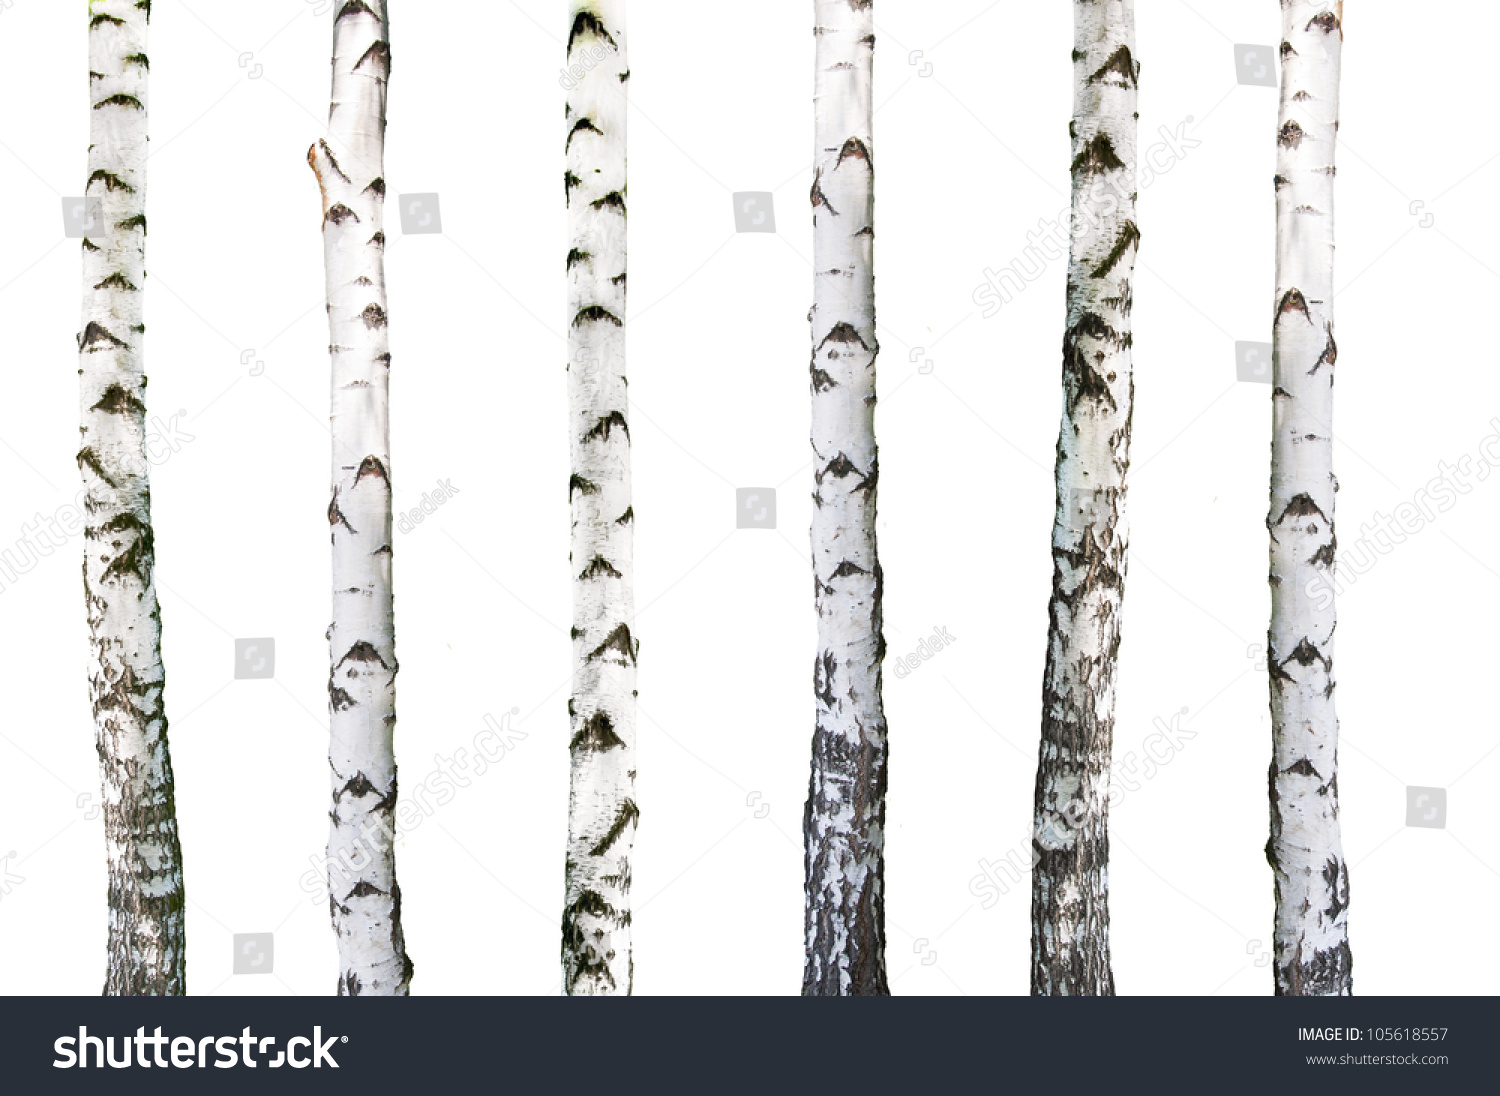 Birch Bark Natural Texture Background Stock Photo - Download Image Now F56